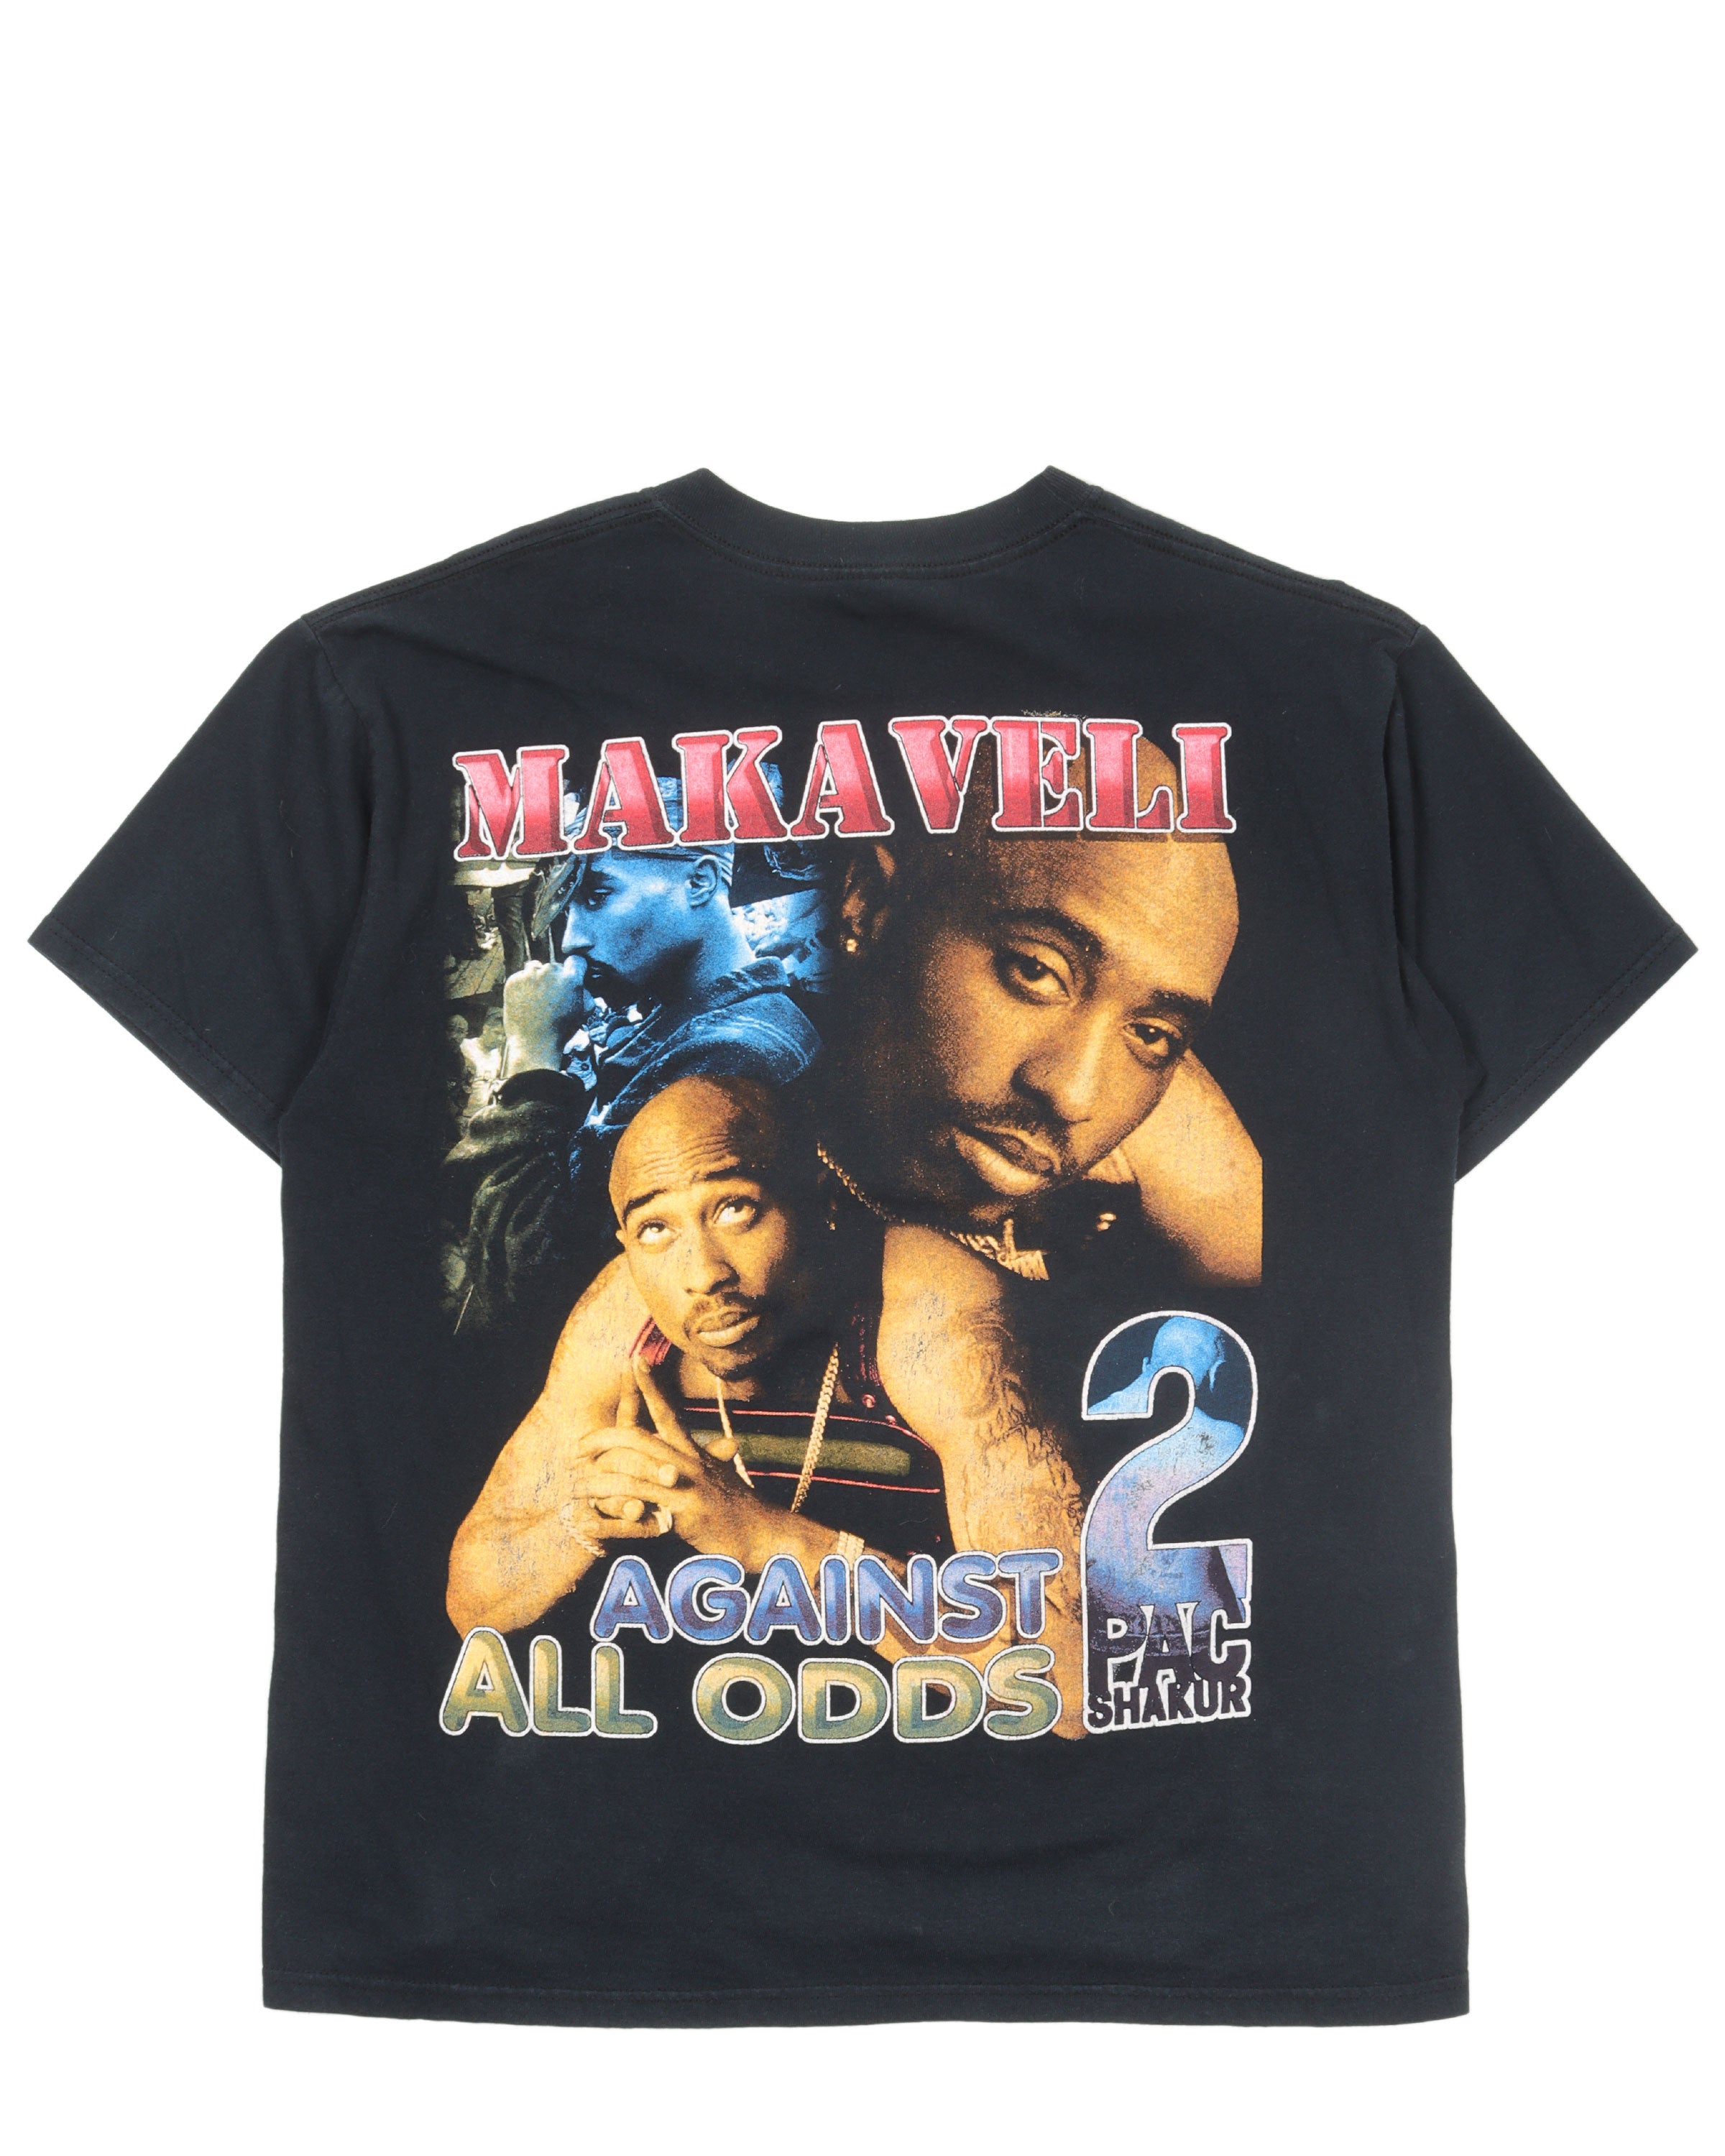 Tupac "Against All Odds" T-Shirt